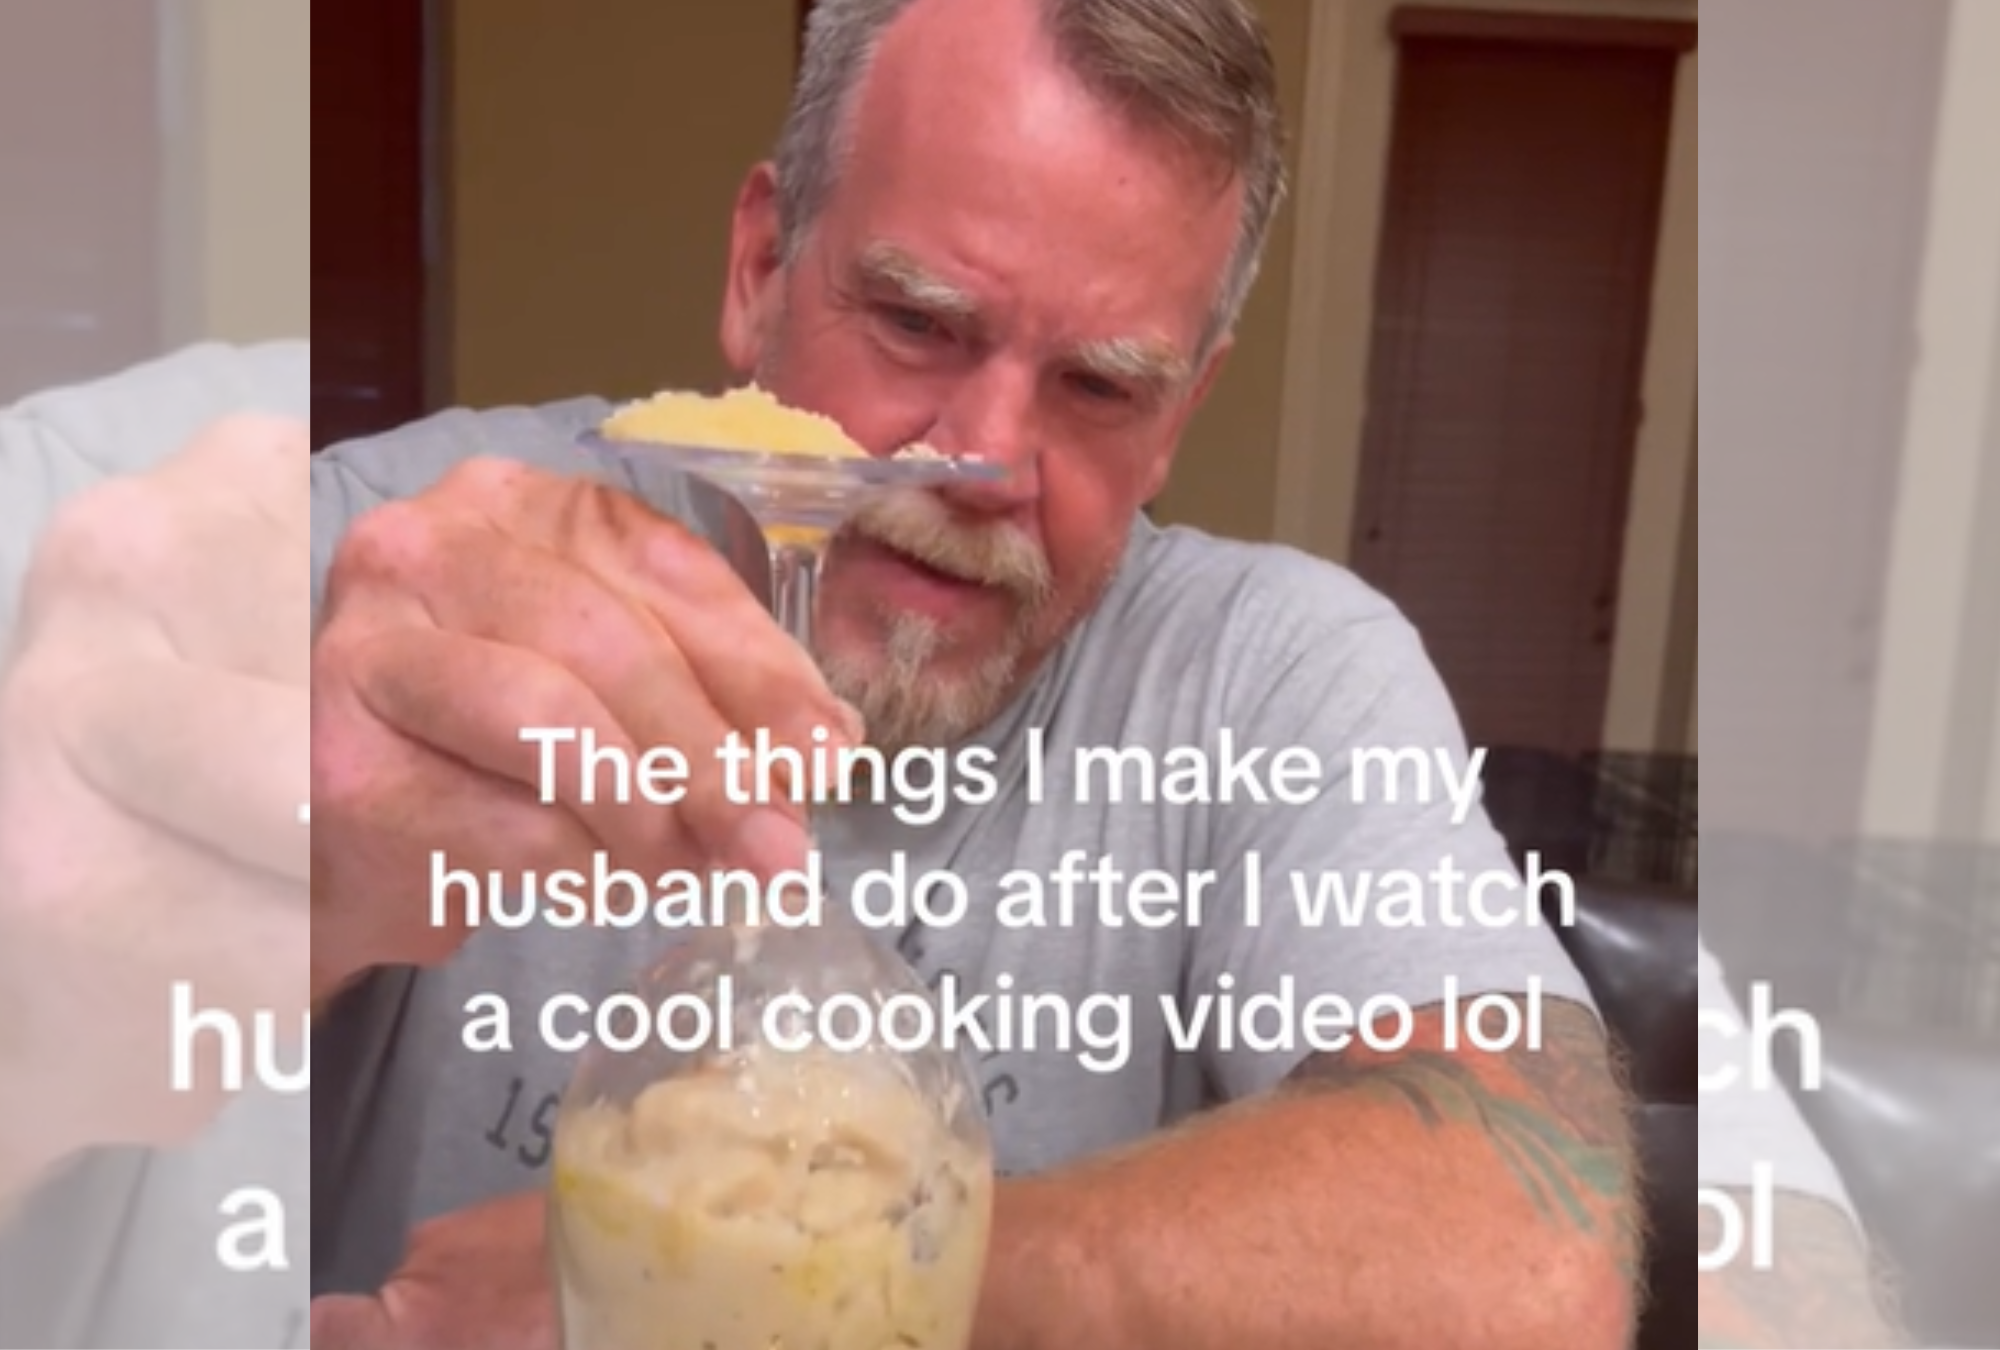 Woman recreates viral cooking video, baffles husband: “leave him alone”